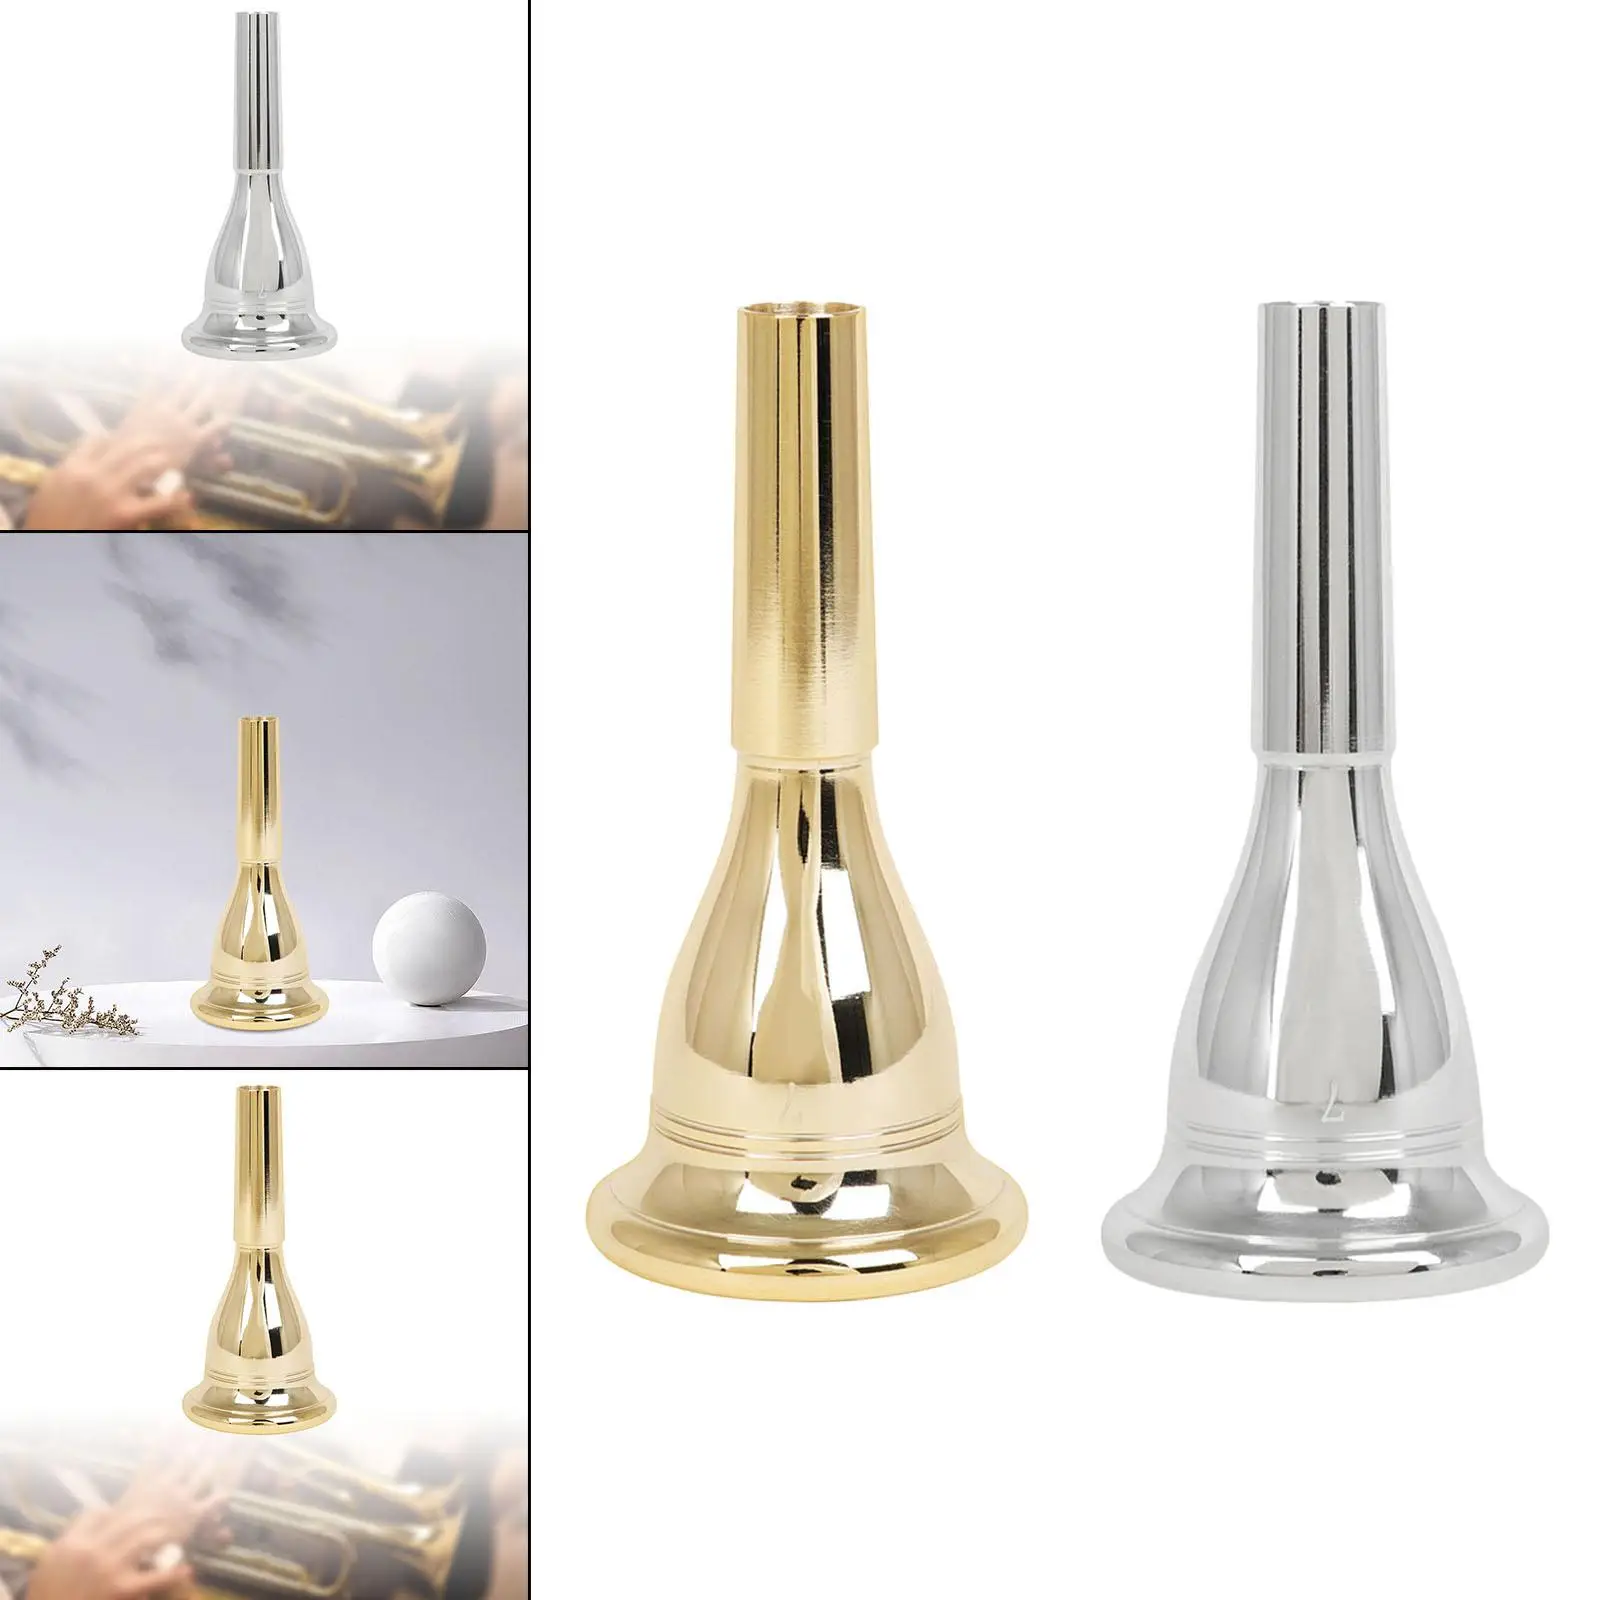 2x Brass Tuba Mouthpiece Precise Music Parts for Beginners Professional